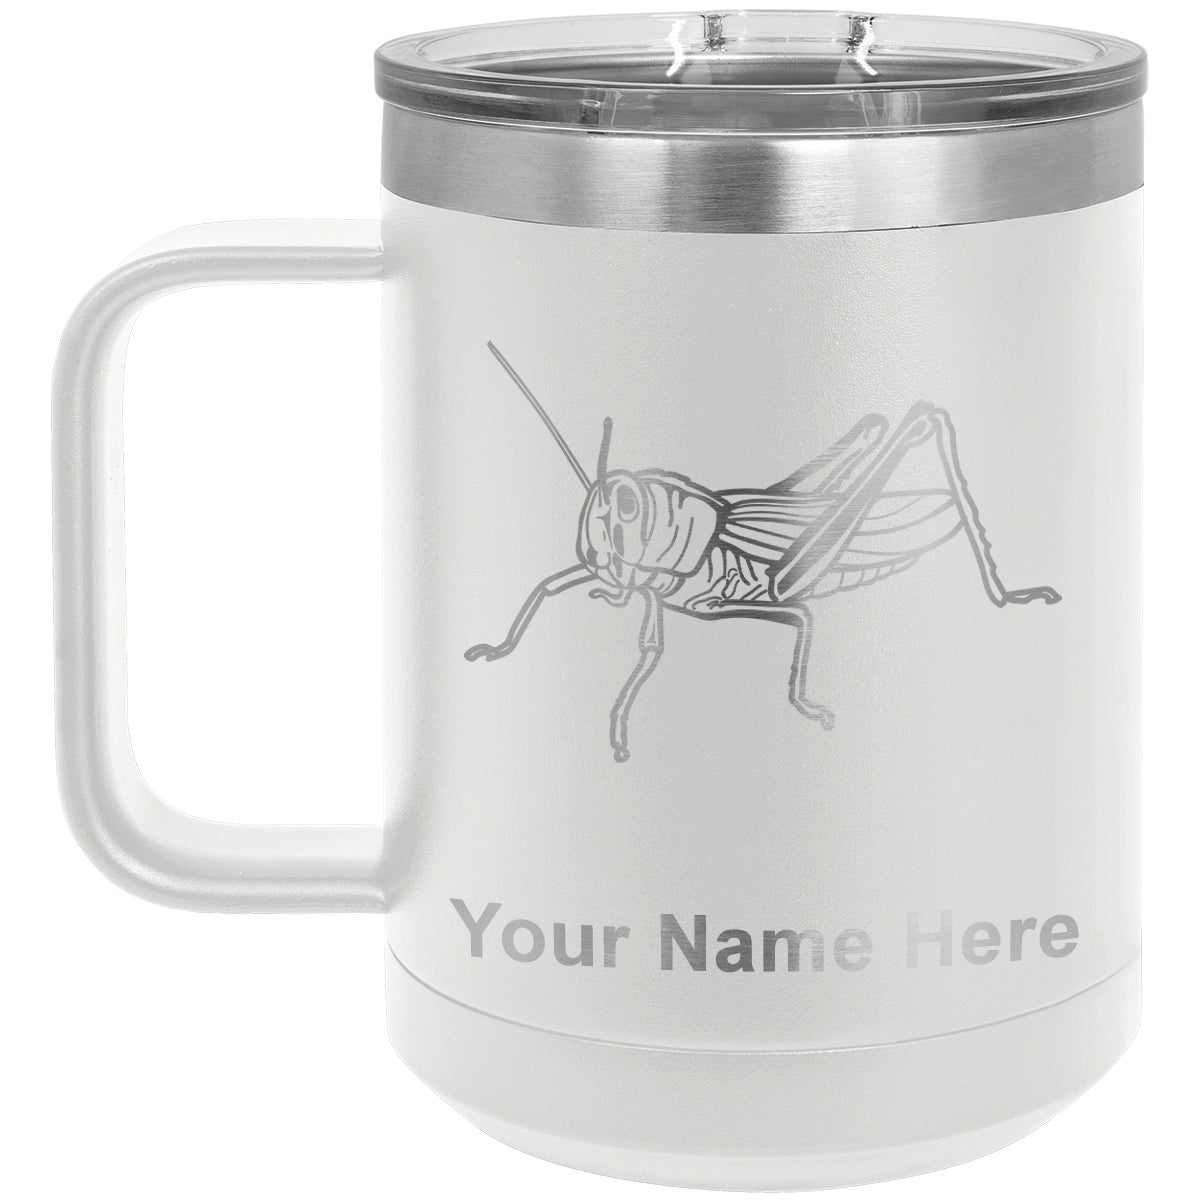 15oz Vacuum Insulated Coffee Mug, Grasshopper, Personalized Engraving Included